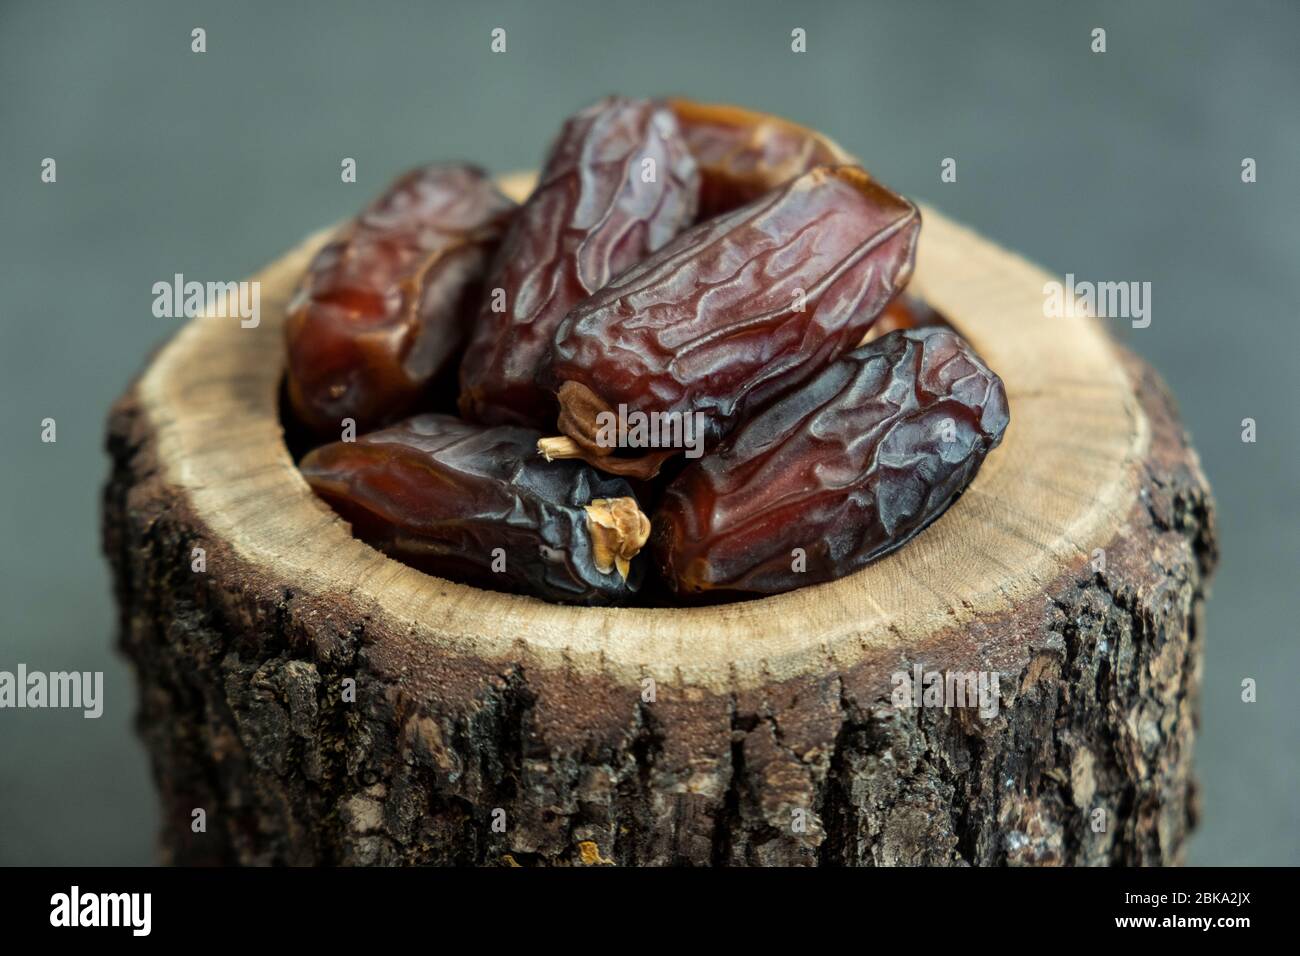 Raw date fruit ready to eat in wooden bowl on concrete background. Traditional, delicious and healthy ramadan food. Stock Photo